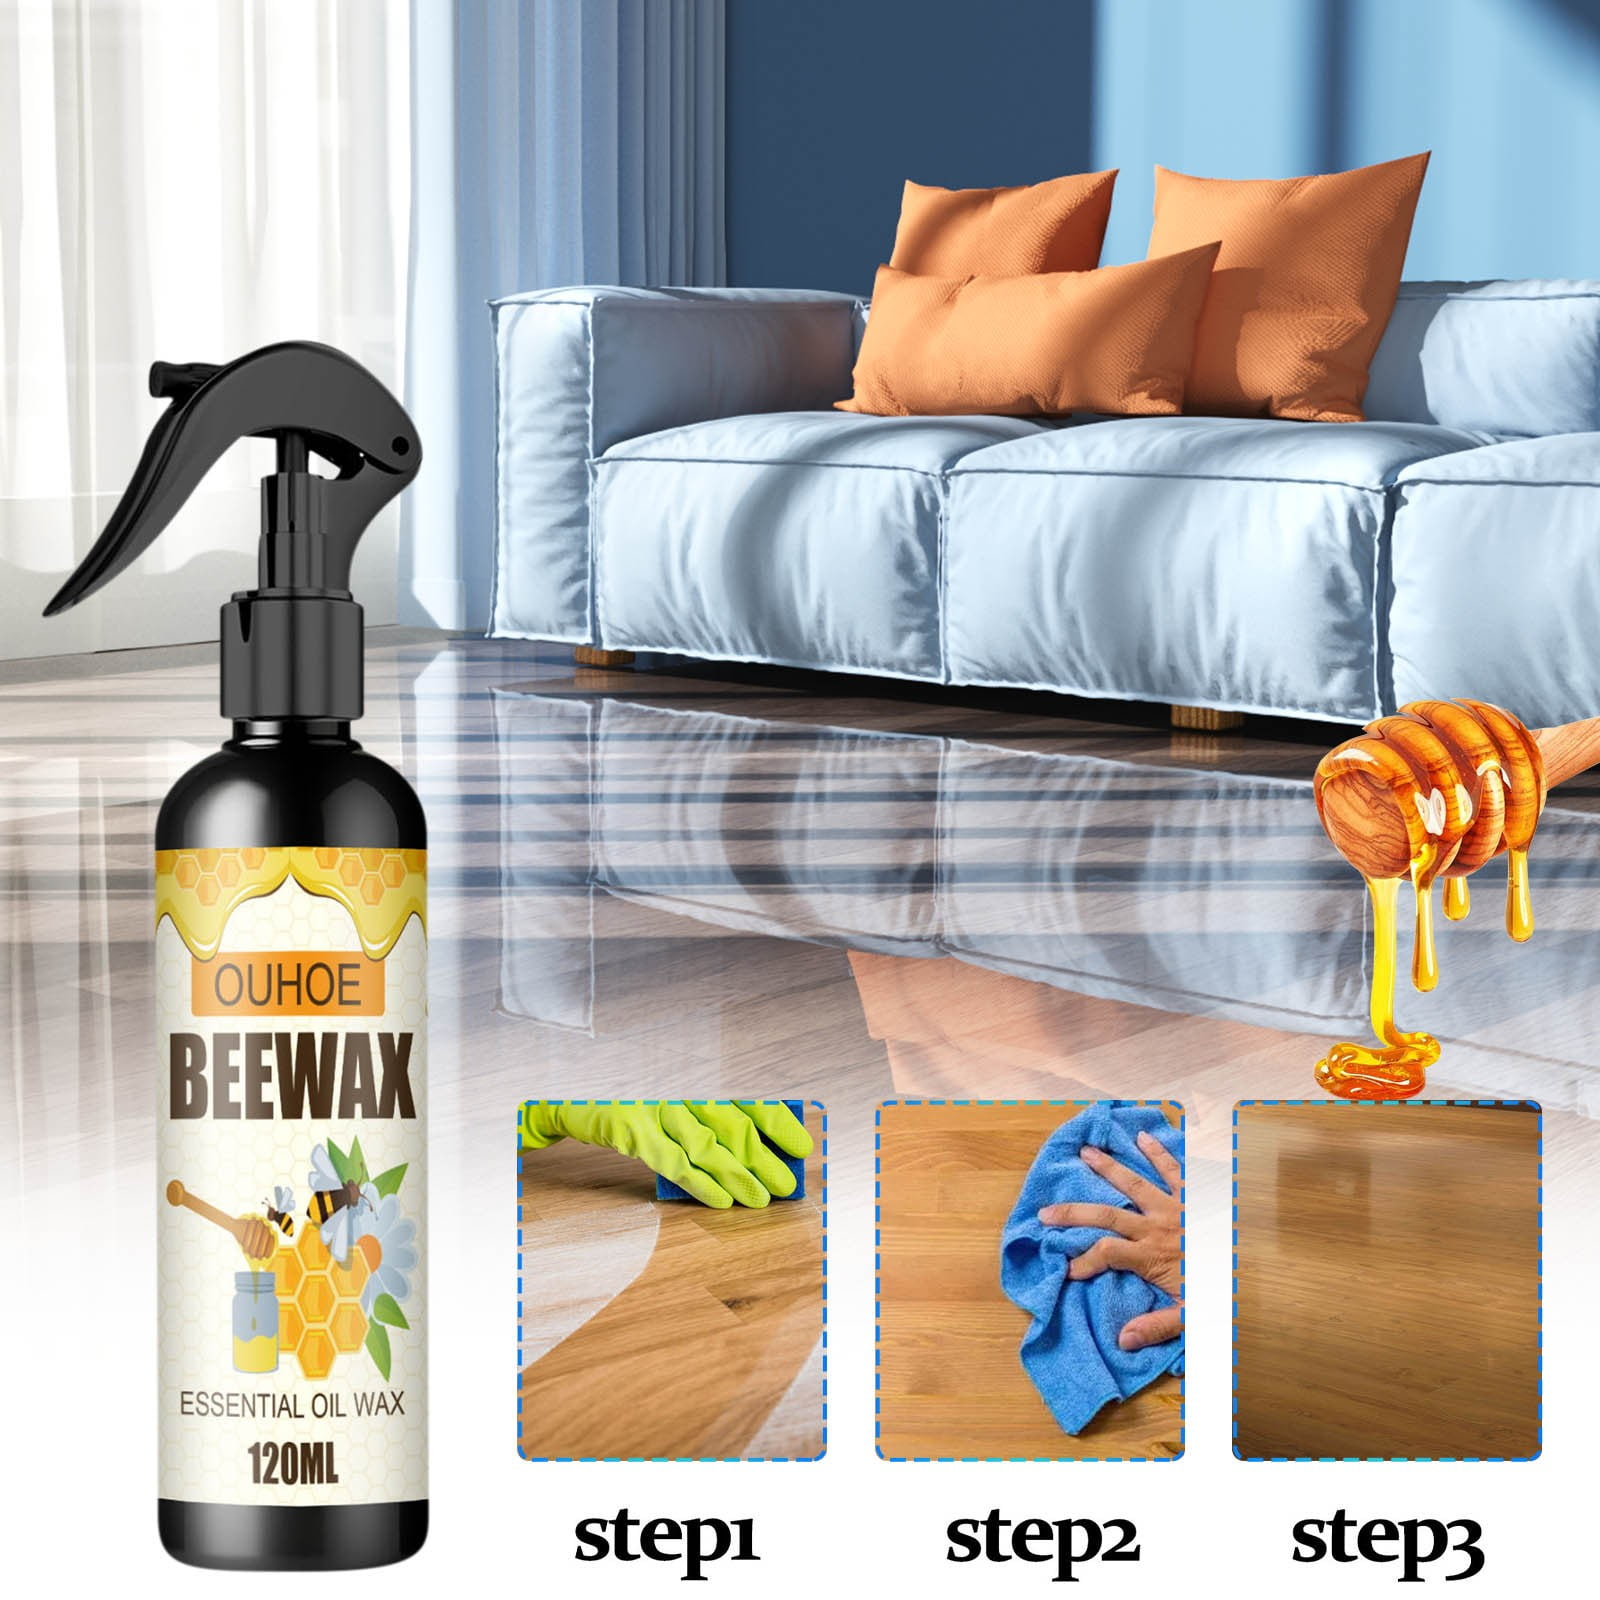  Natural Micro-Molecularized Beeswax Spray Furniture Polish,  Beeswax For Wood Beeswax Spray For Wood Floors, Furniture Care, Used for  Floor Table Chair Home Furniture to Shine and Protect 120ML (3PC) : Health